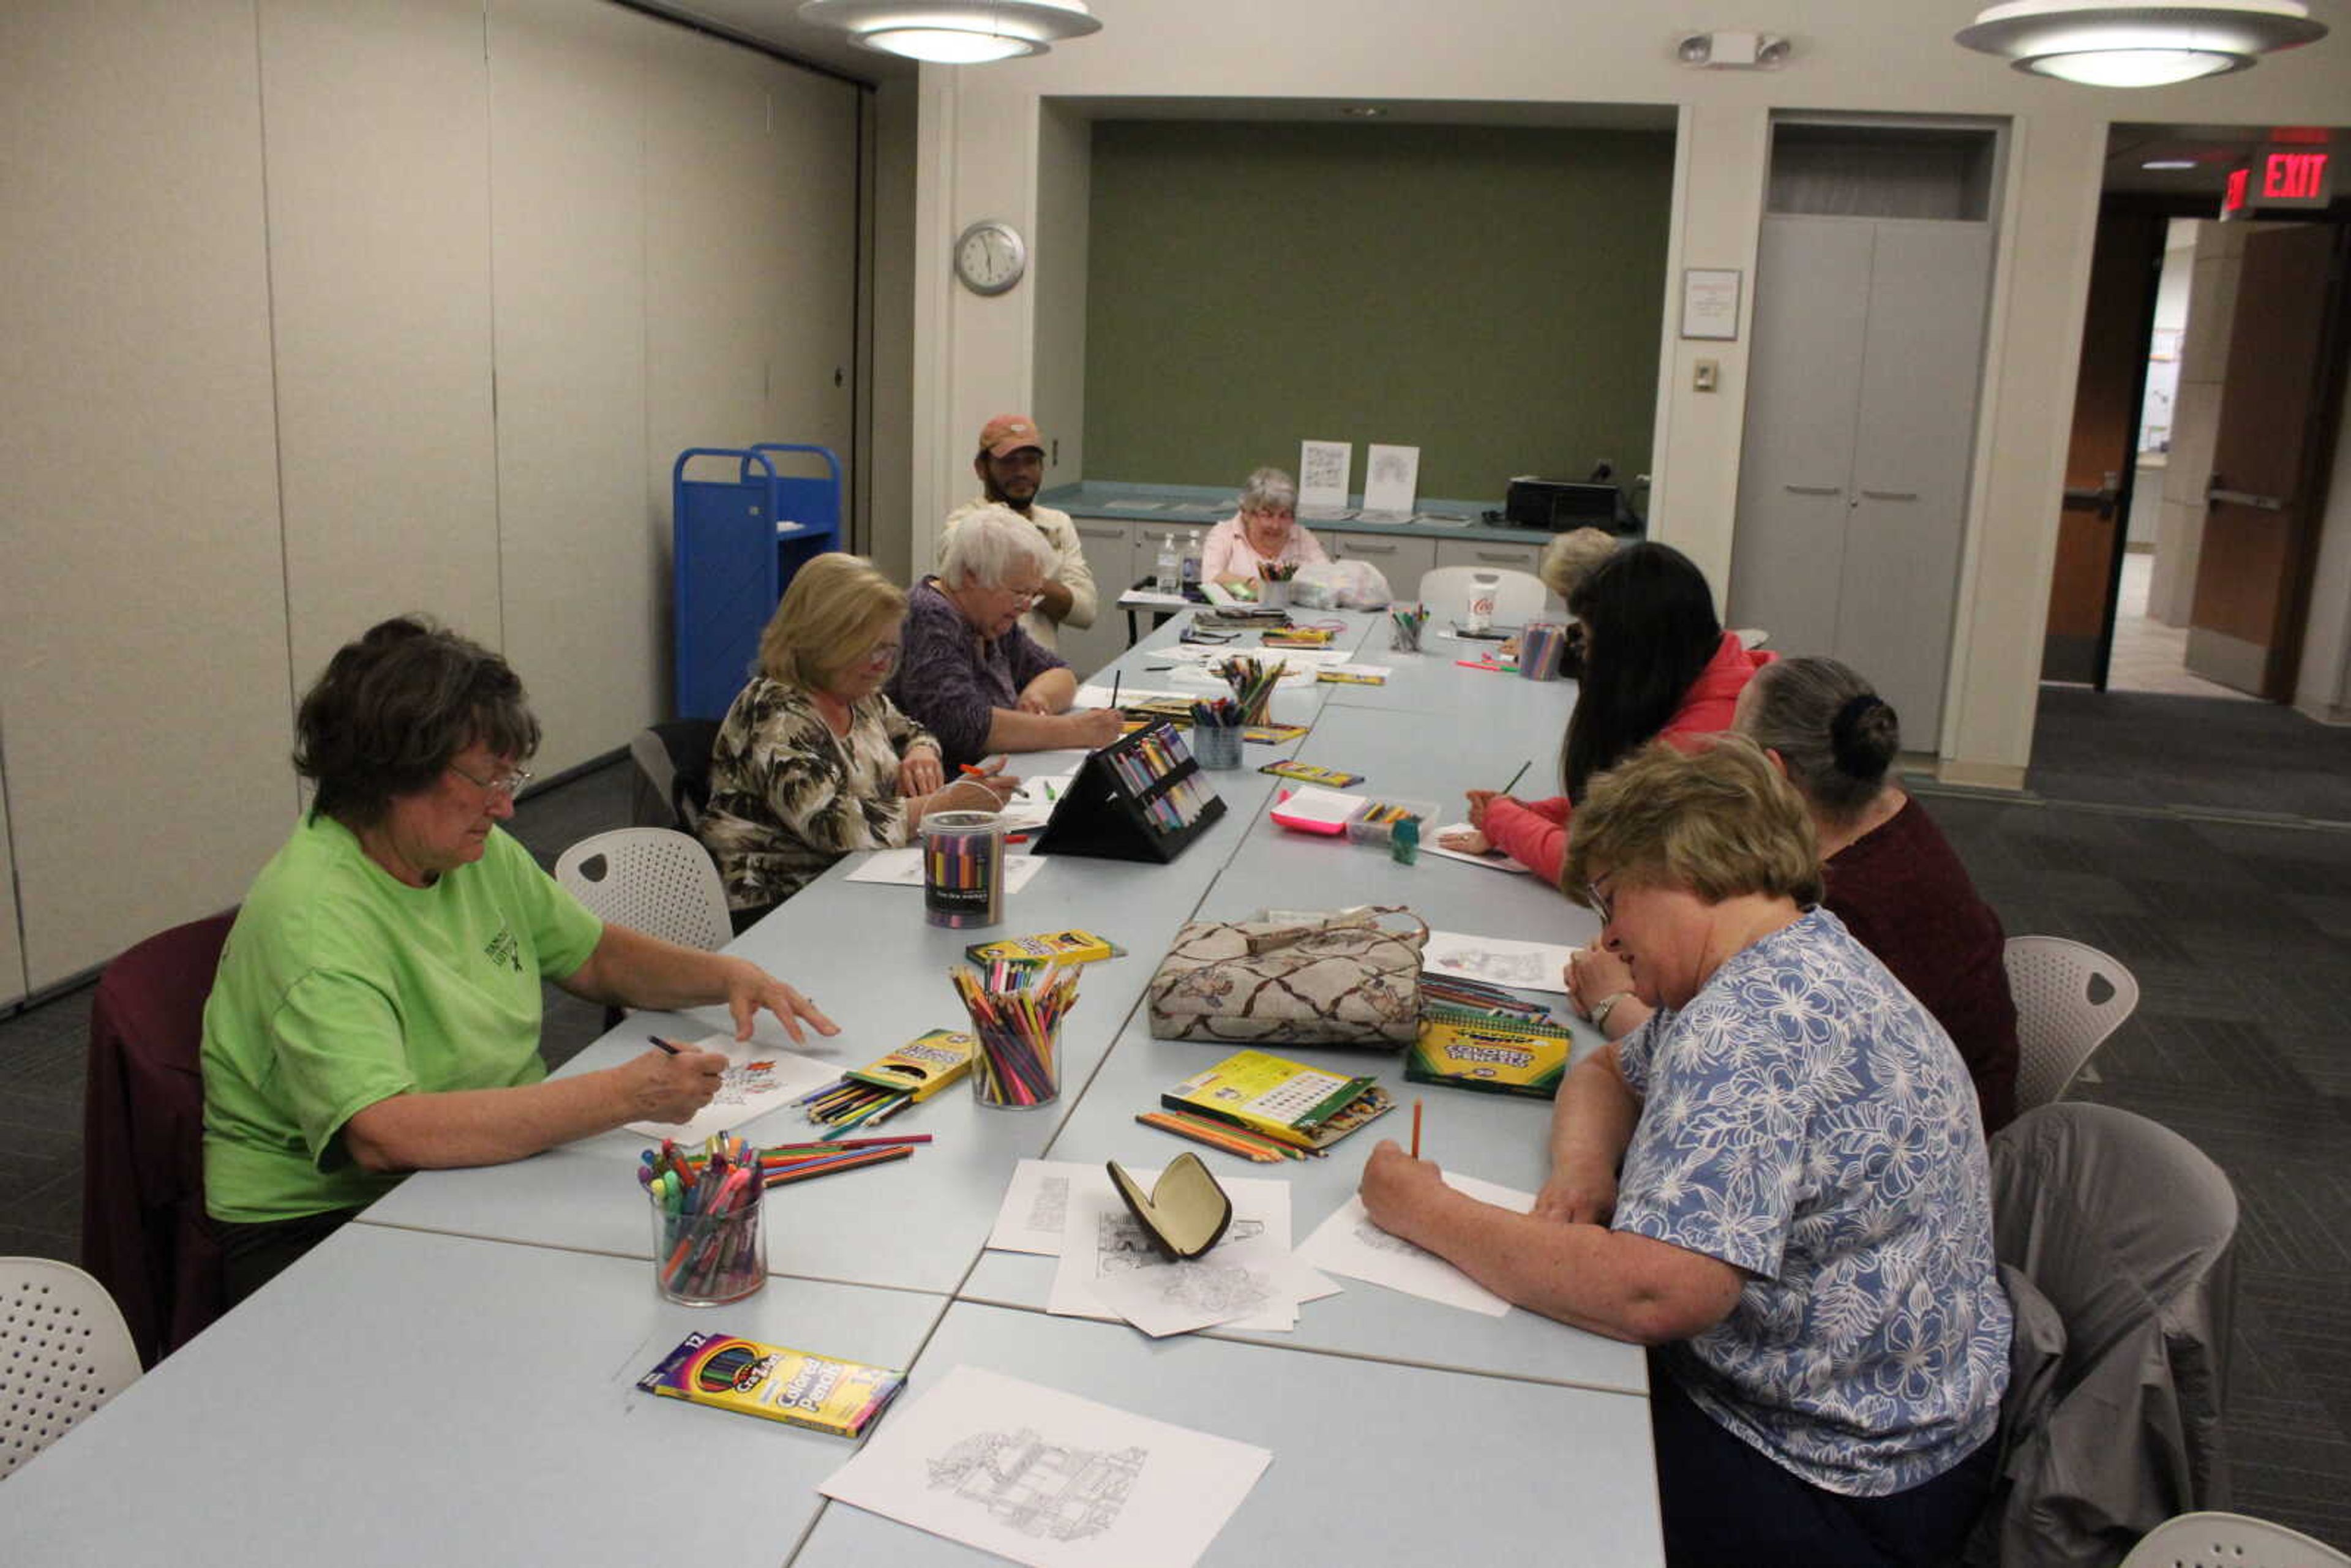 Guests color and socialize with each other at Cape Girardeau Public Library’s “Coloring for Adults” event on Oct. 24.